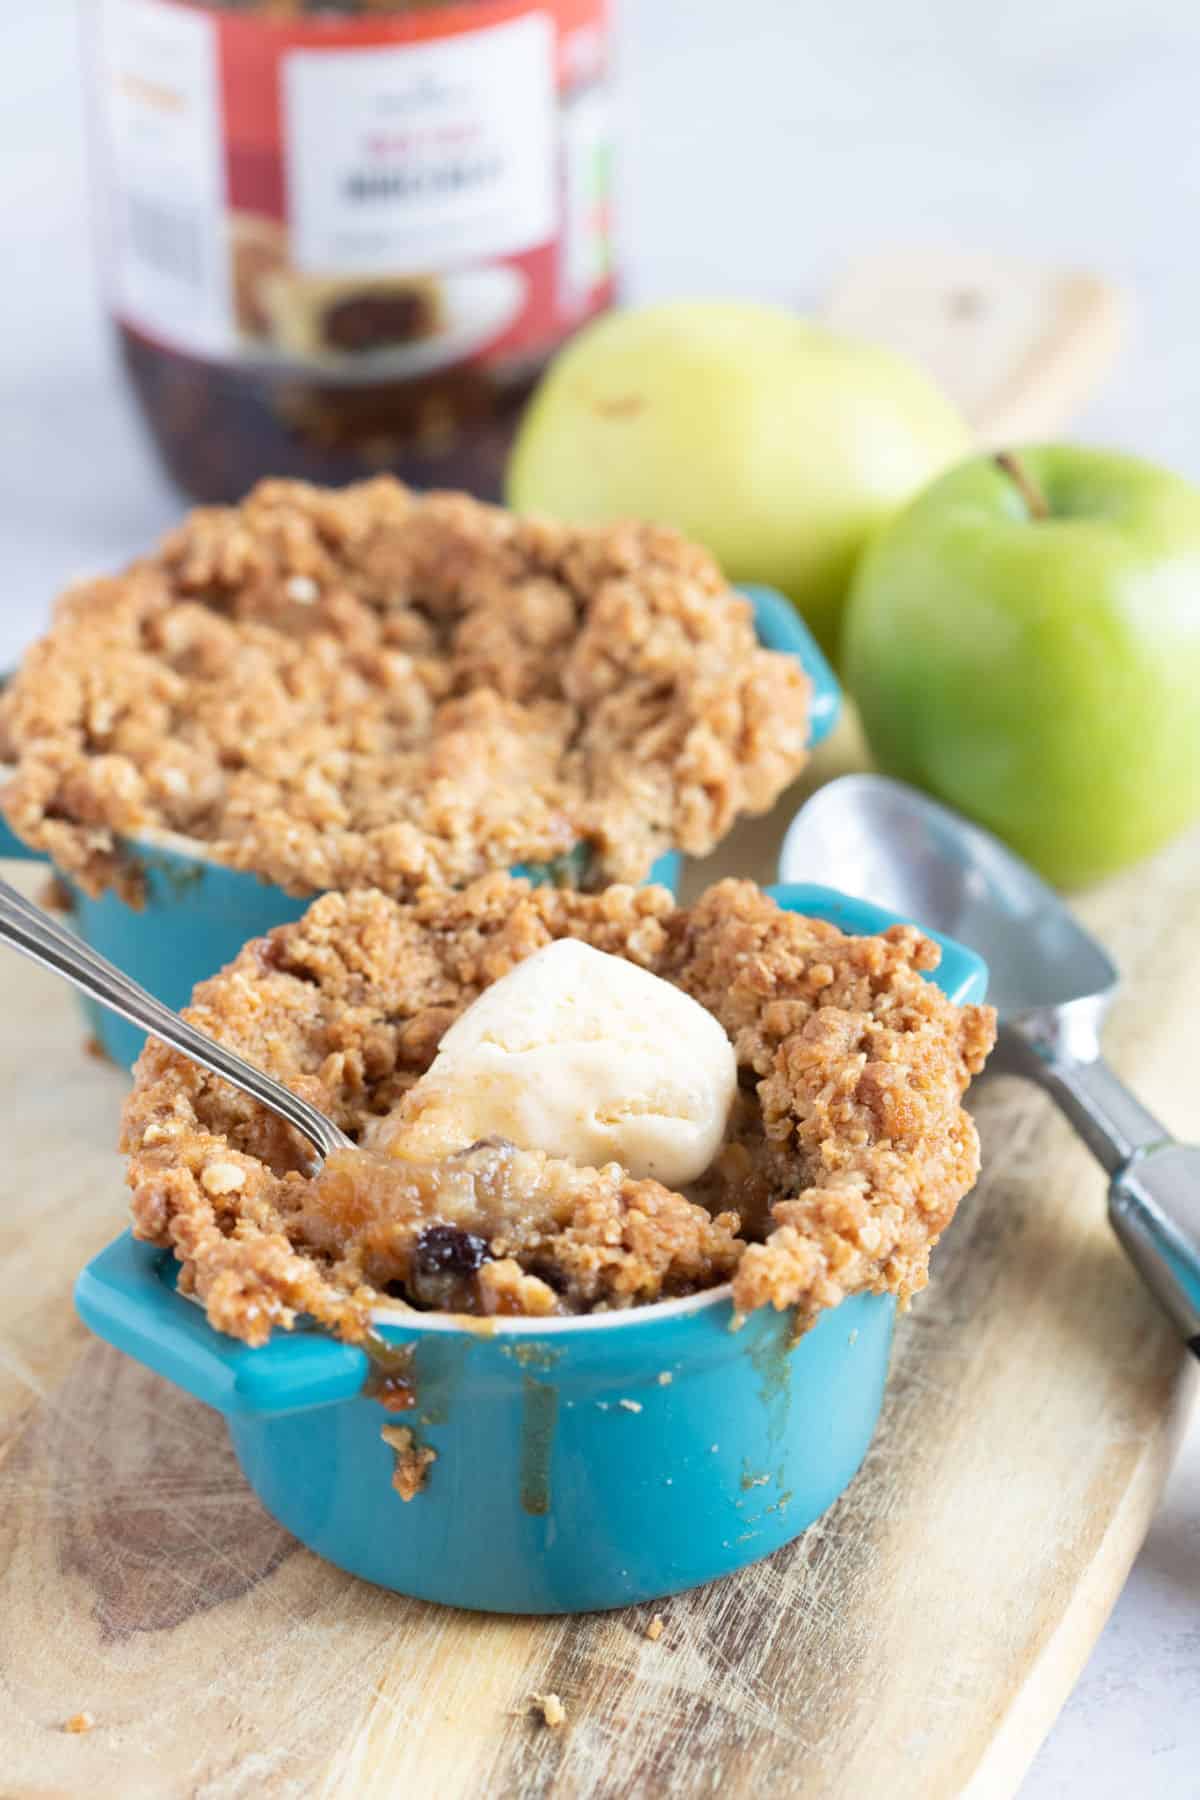 Apple and mincemeat crumble in individual pie dishes.